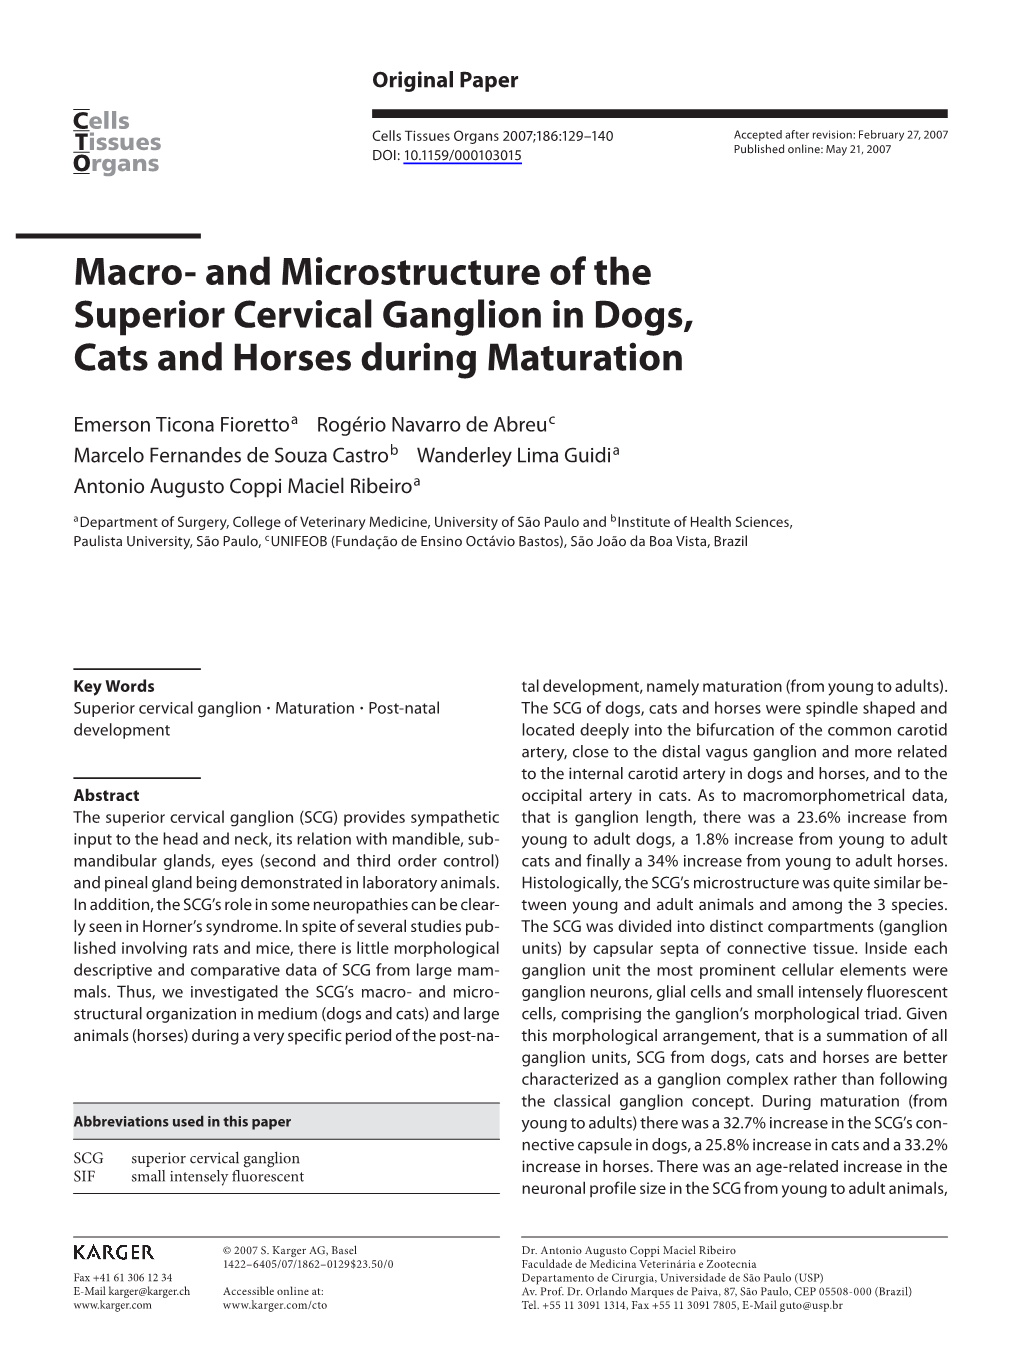 Macro- and Microstructure of the Superior Cervical Ganglion in Dogs, Cats and Horses During Maturation